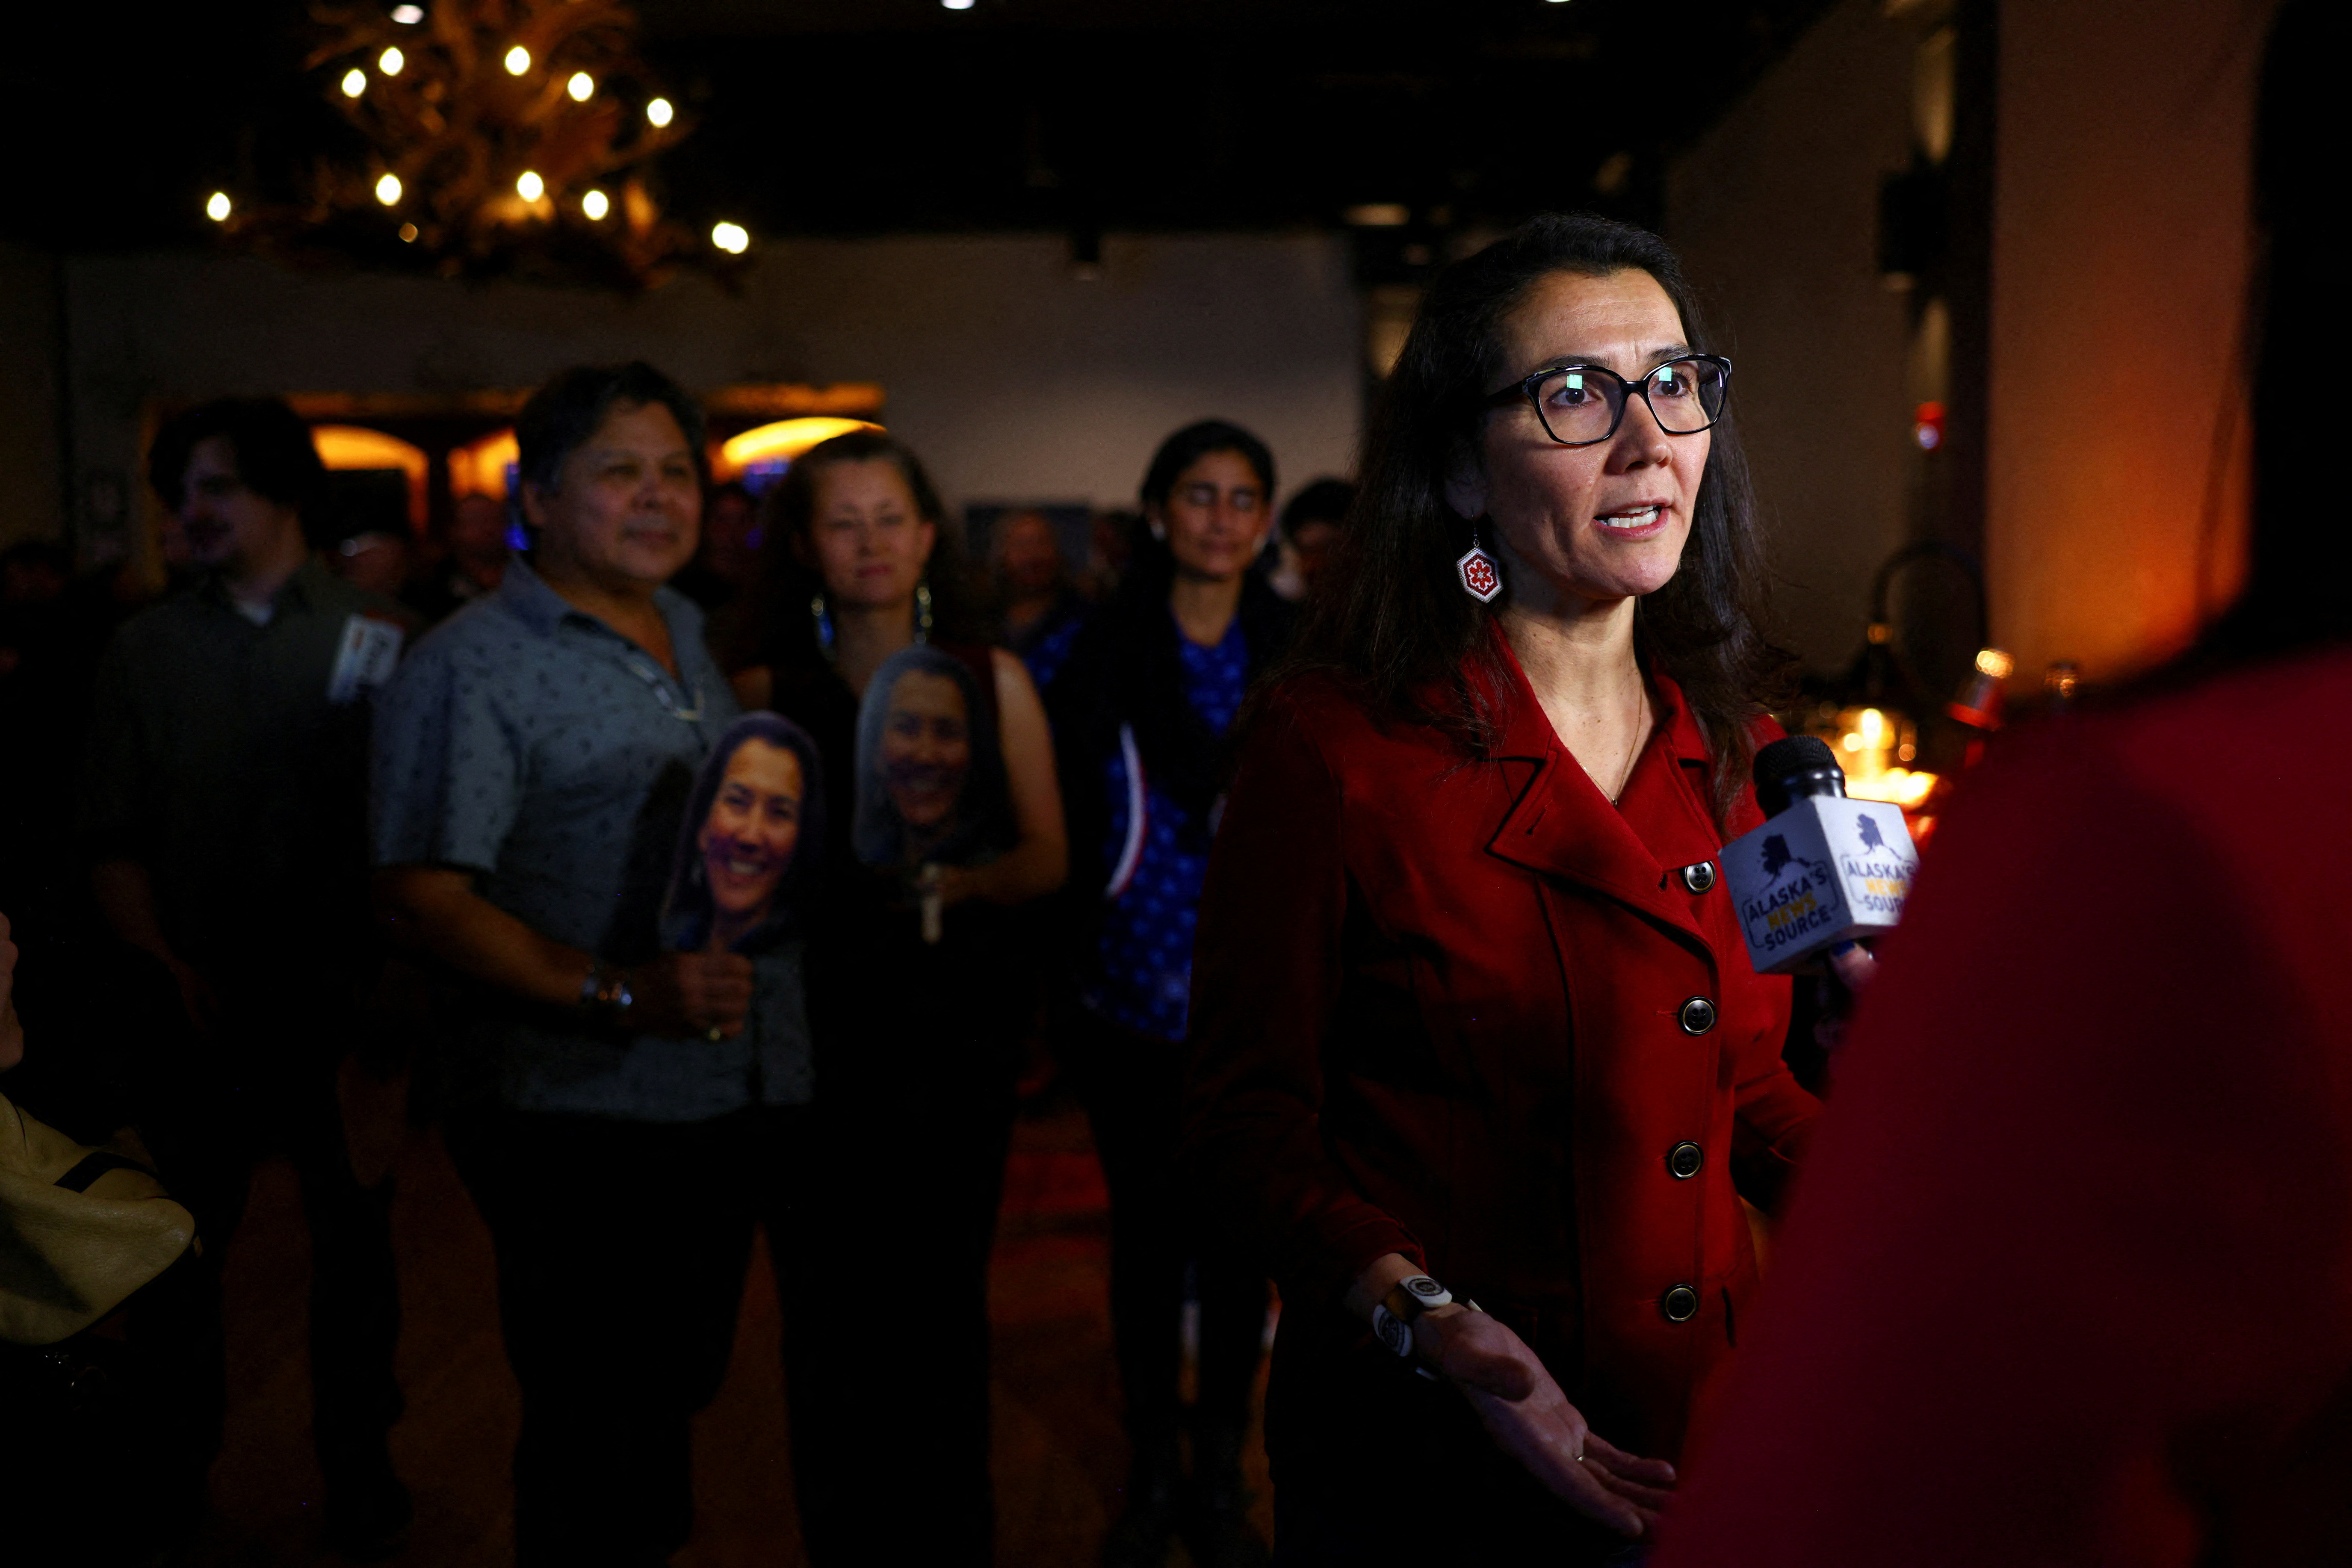 U.S. Representative Mary Peltola reacts during her U.S. election night party in Anchorage